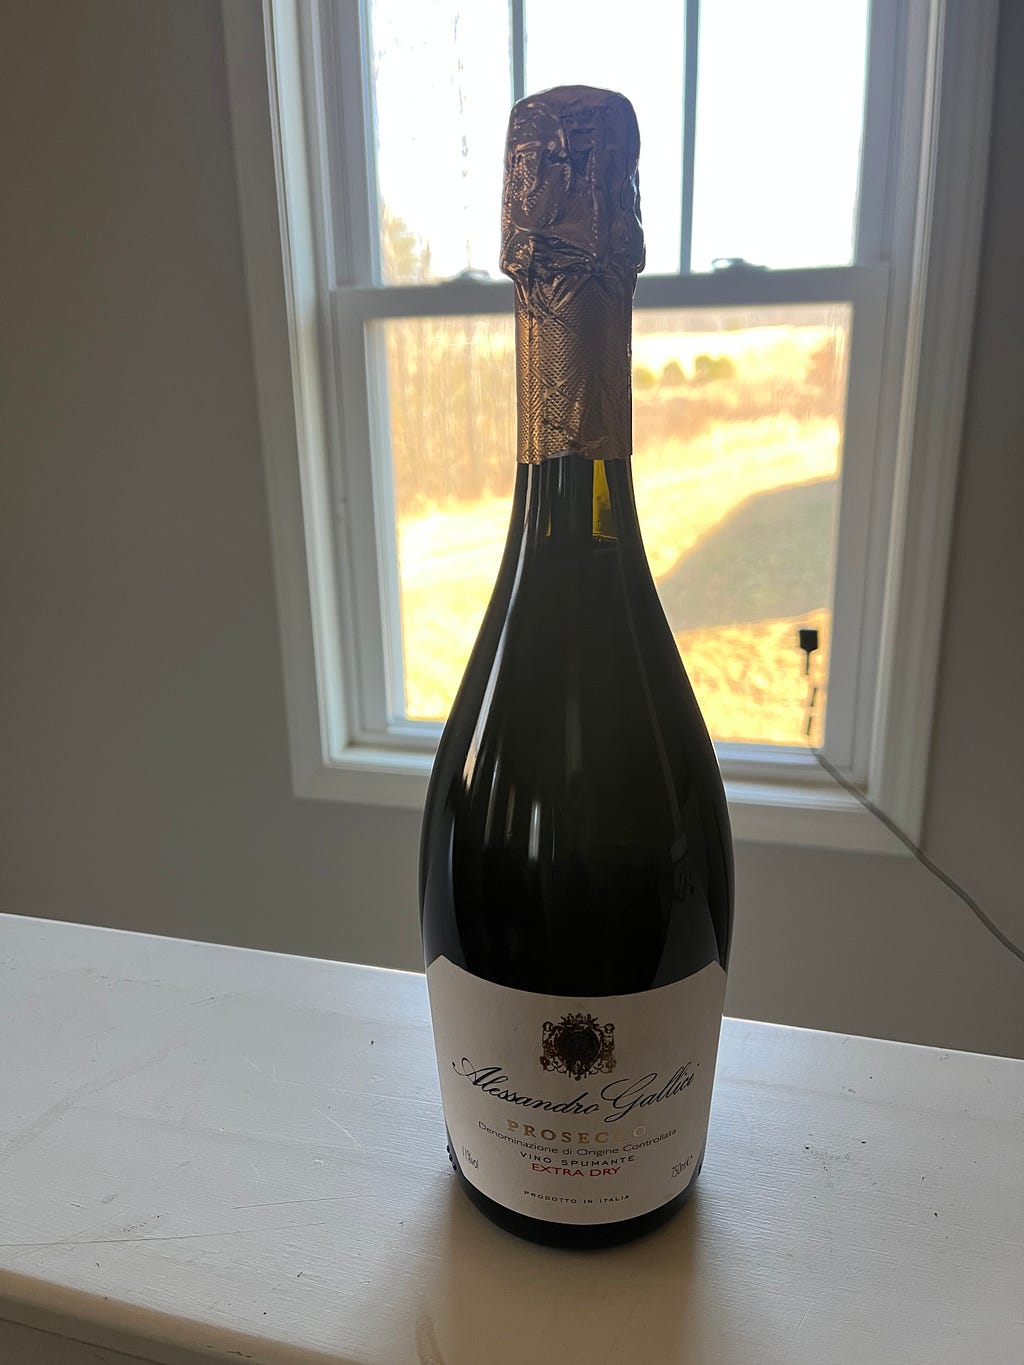 A bottle of Prosecco sits in front of a window